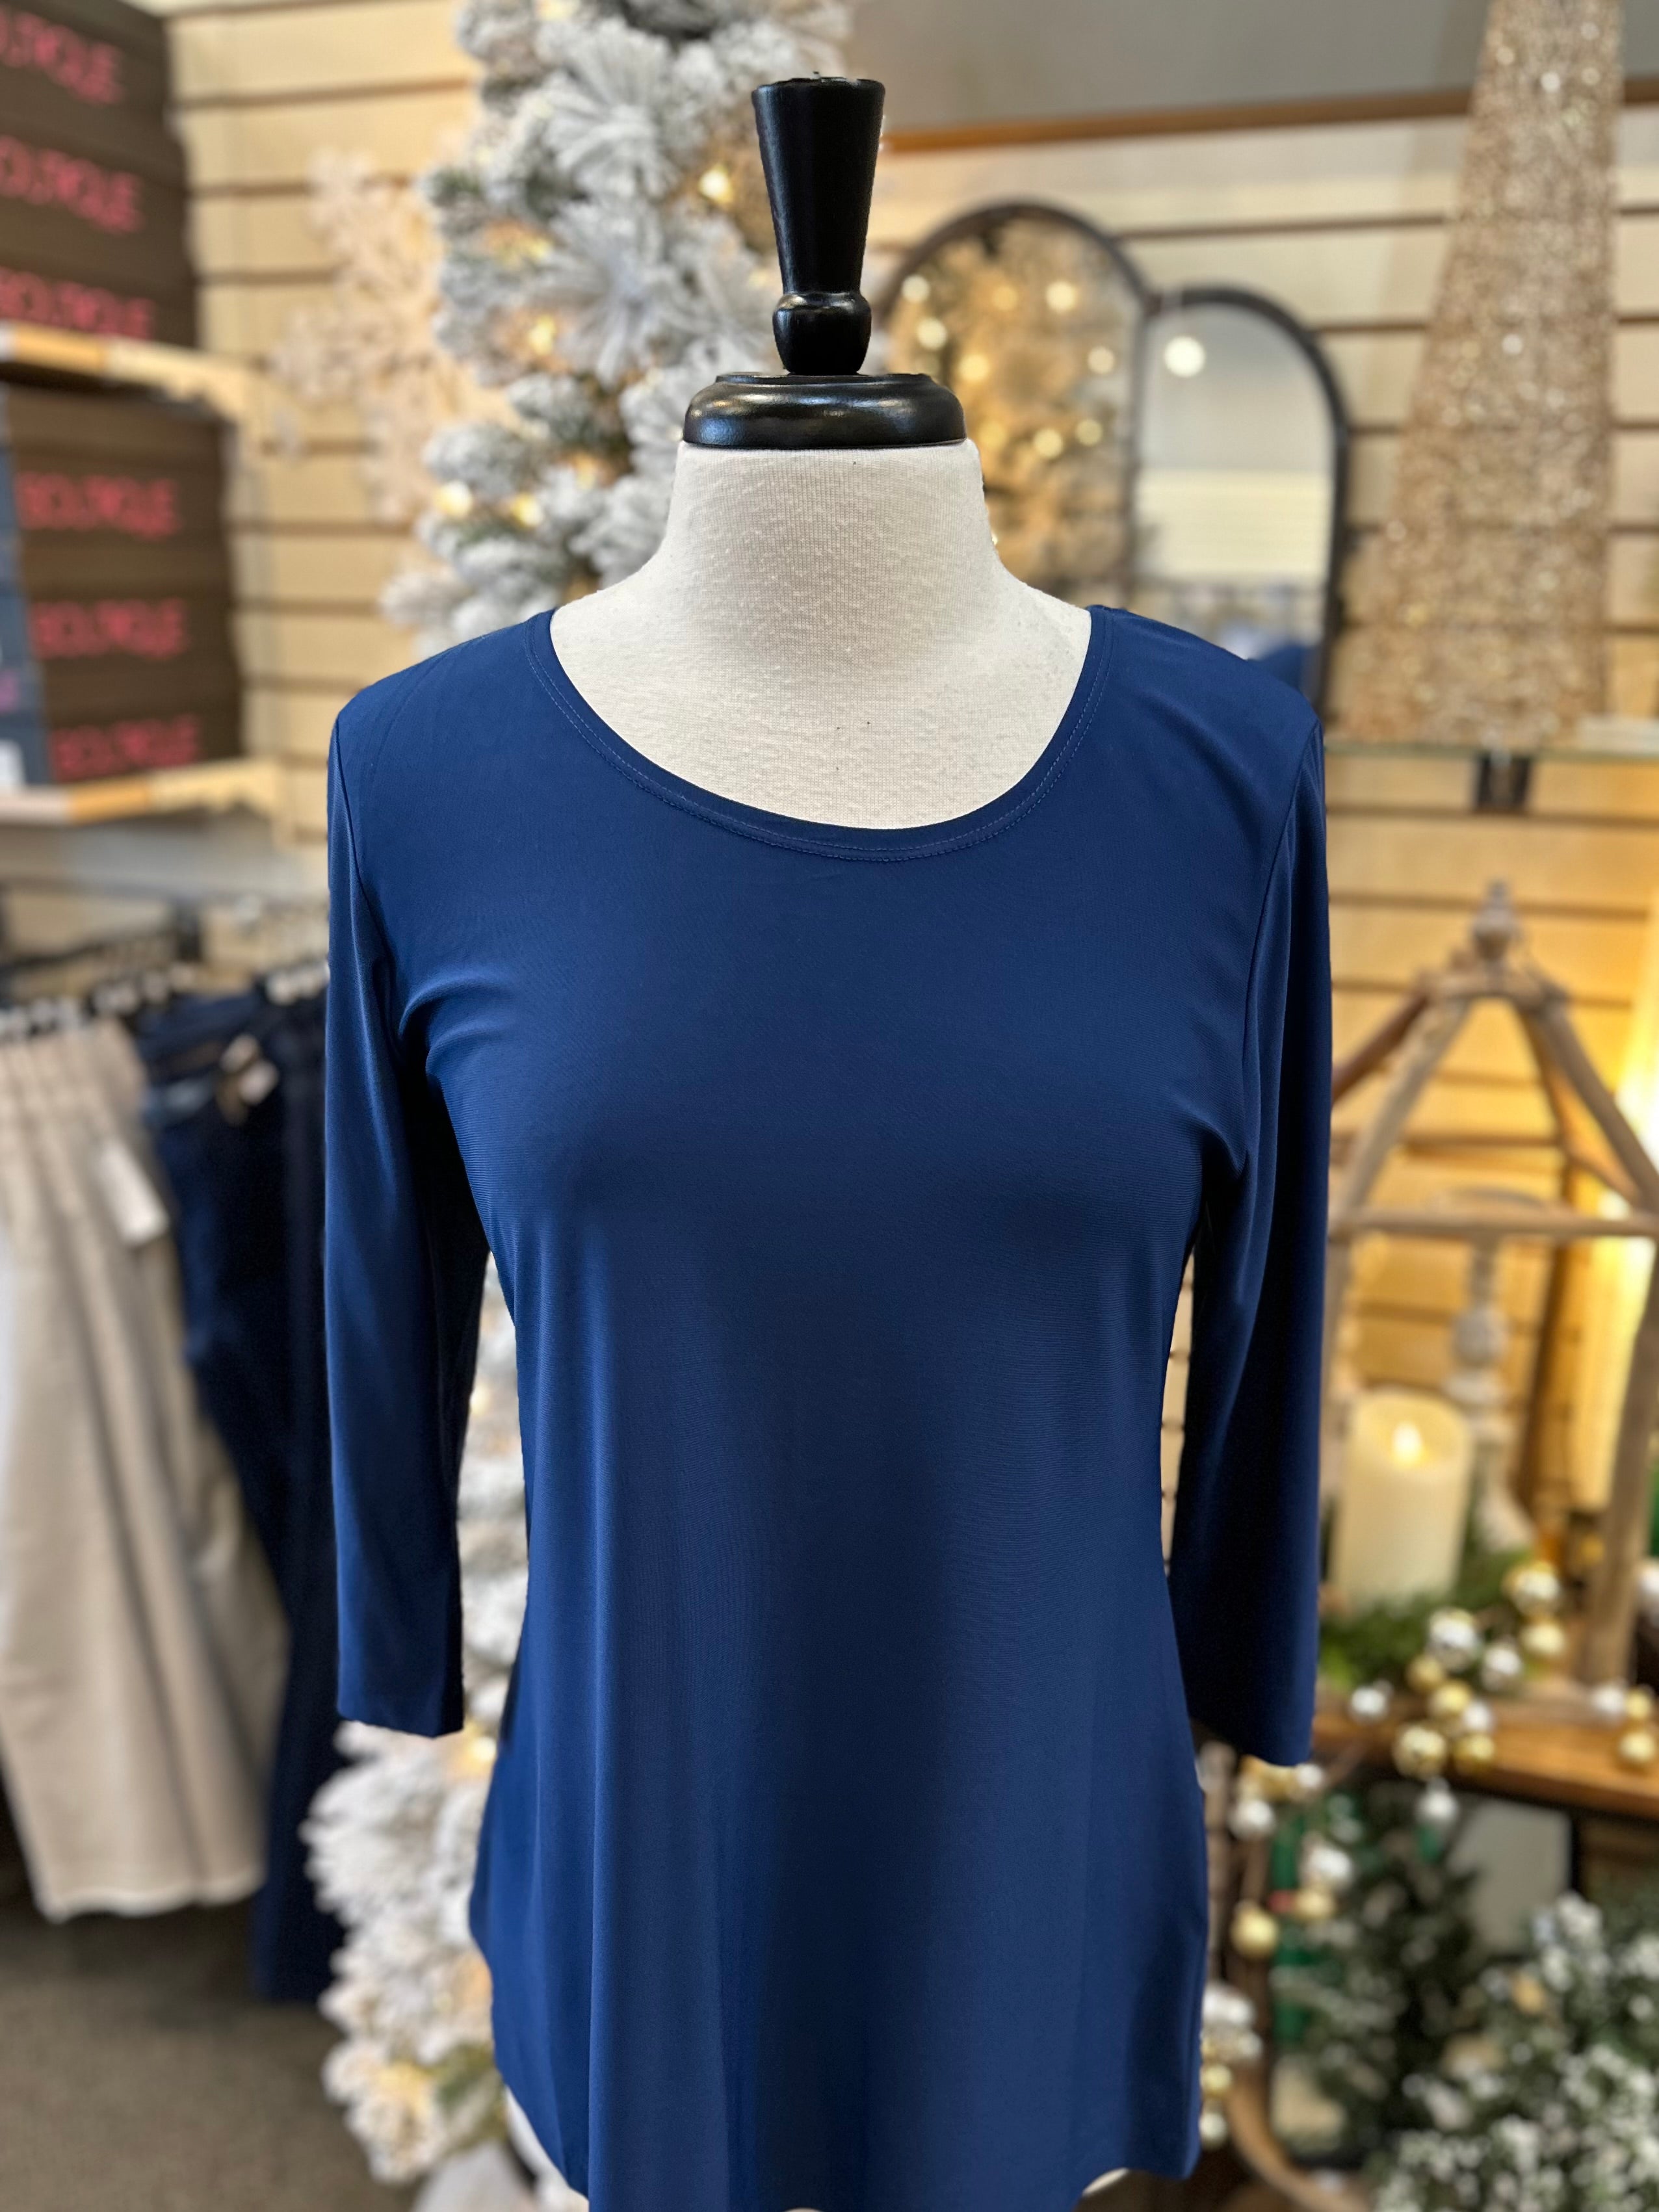 Navy 3/4 Sleeve Scoop Neck Top by Creation